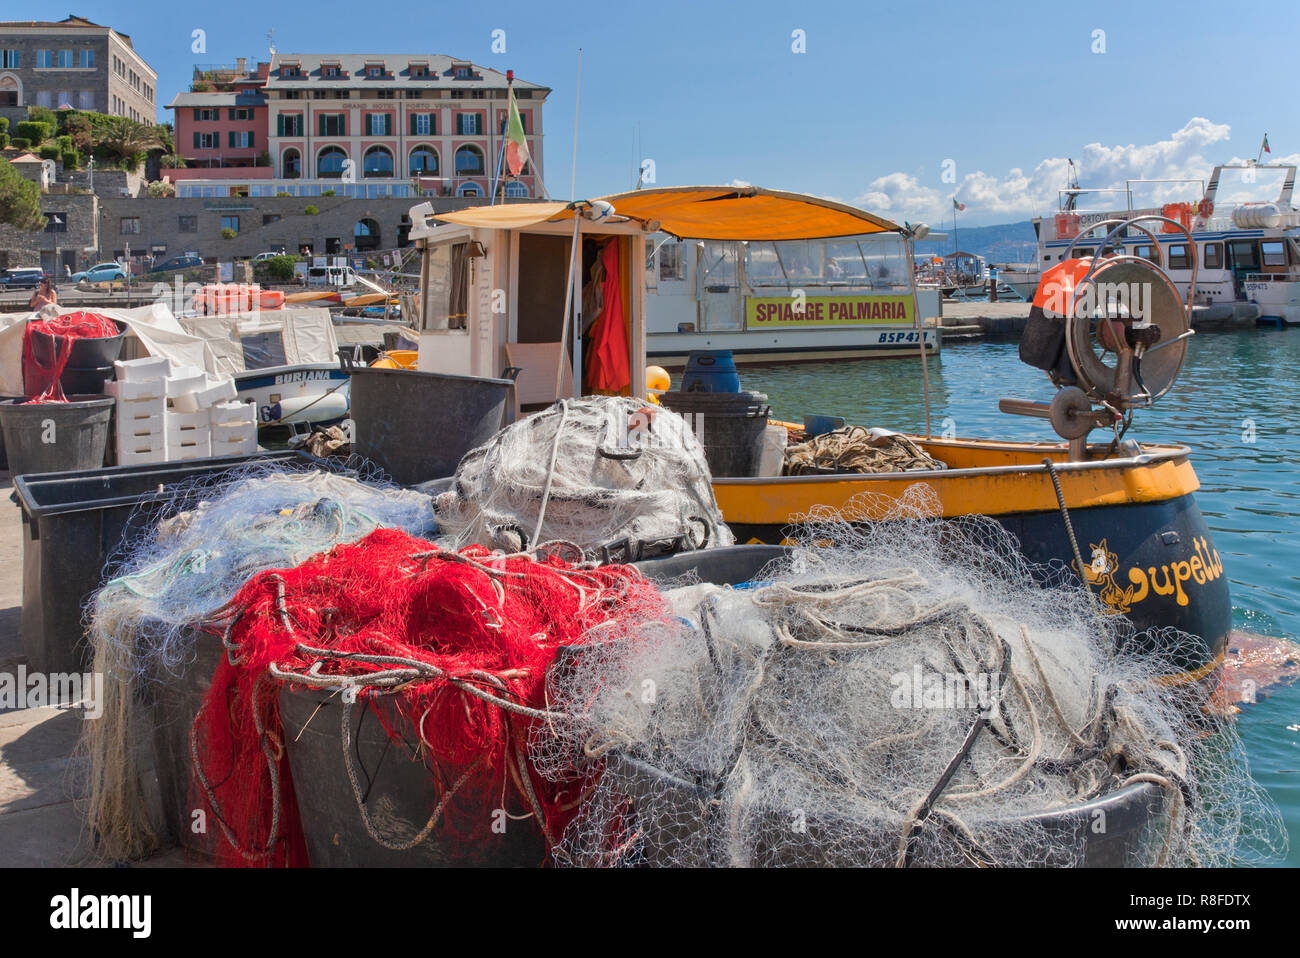 Boat and fishing nets, via Calata Doria, Portovenere, Italy. Sign on boat in background advertises trips to the island beaches of Palmeria. Stock Photo